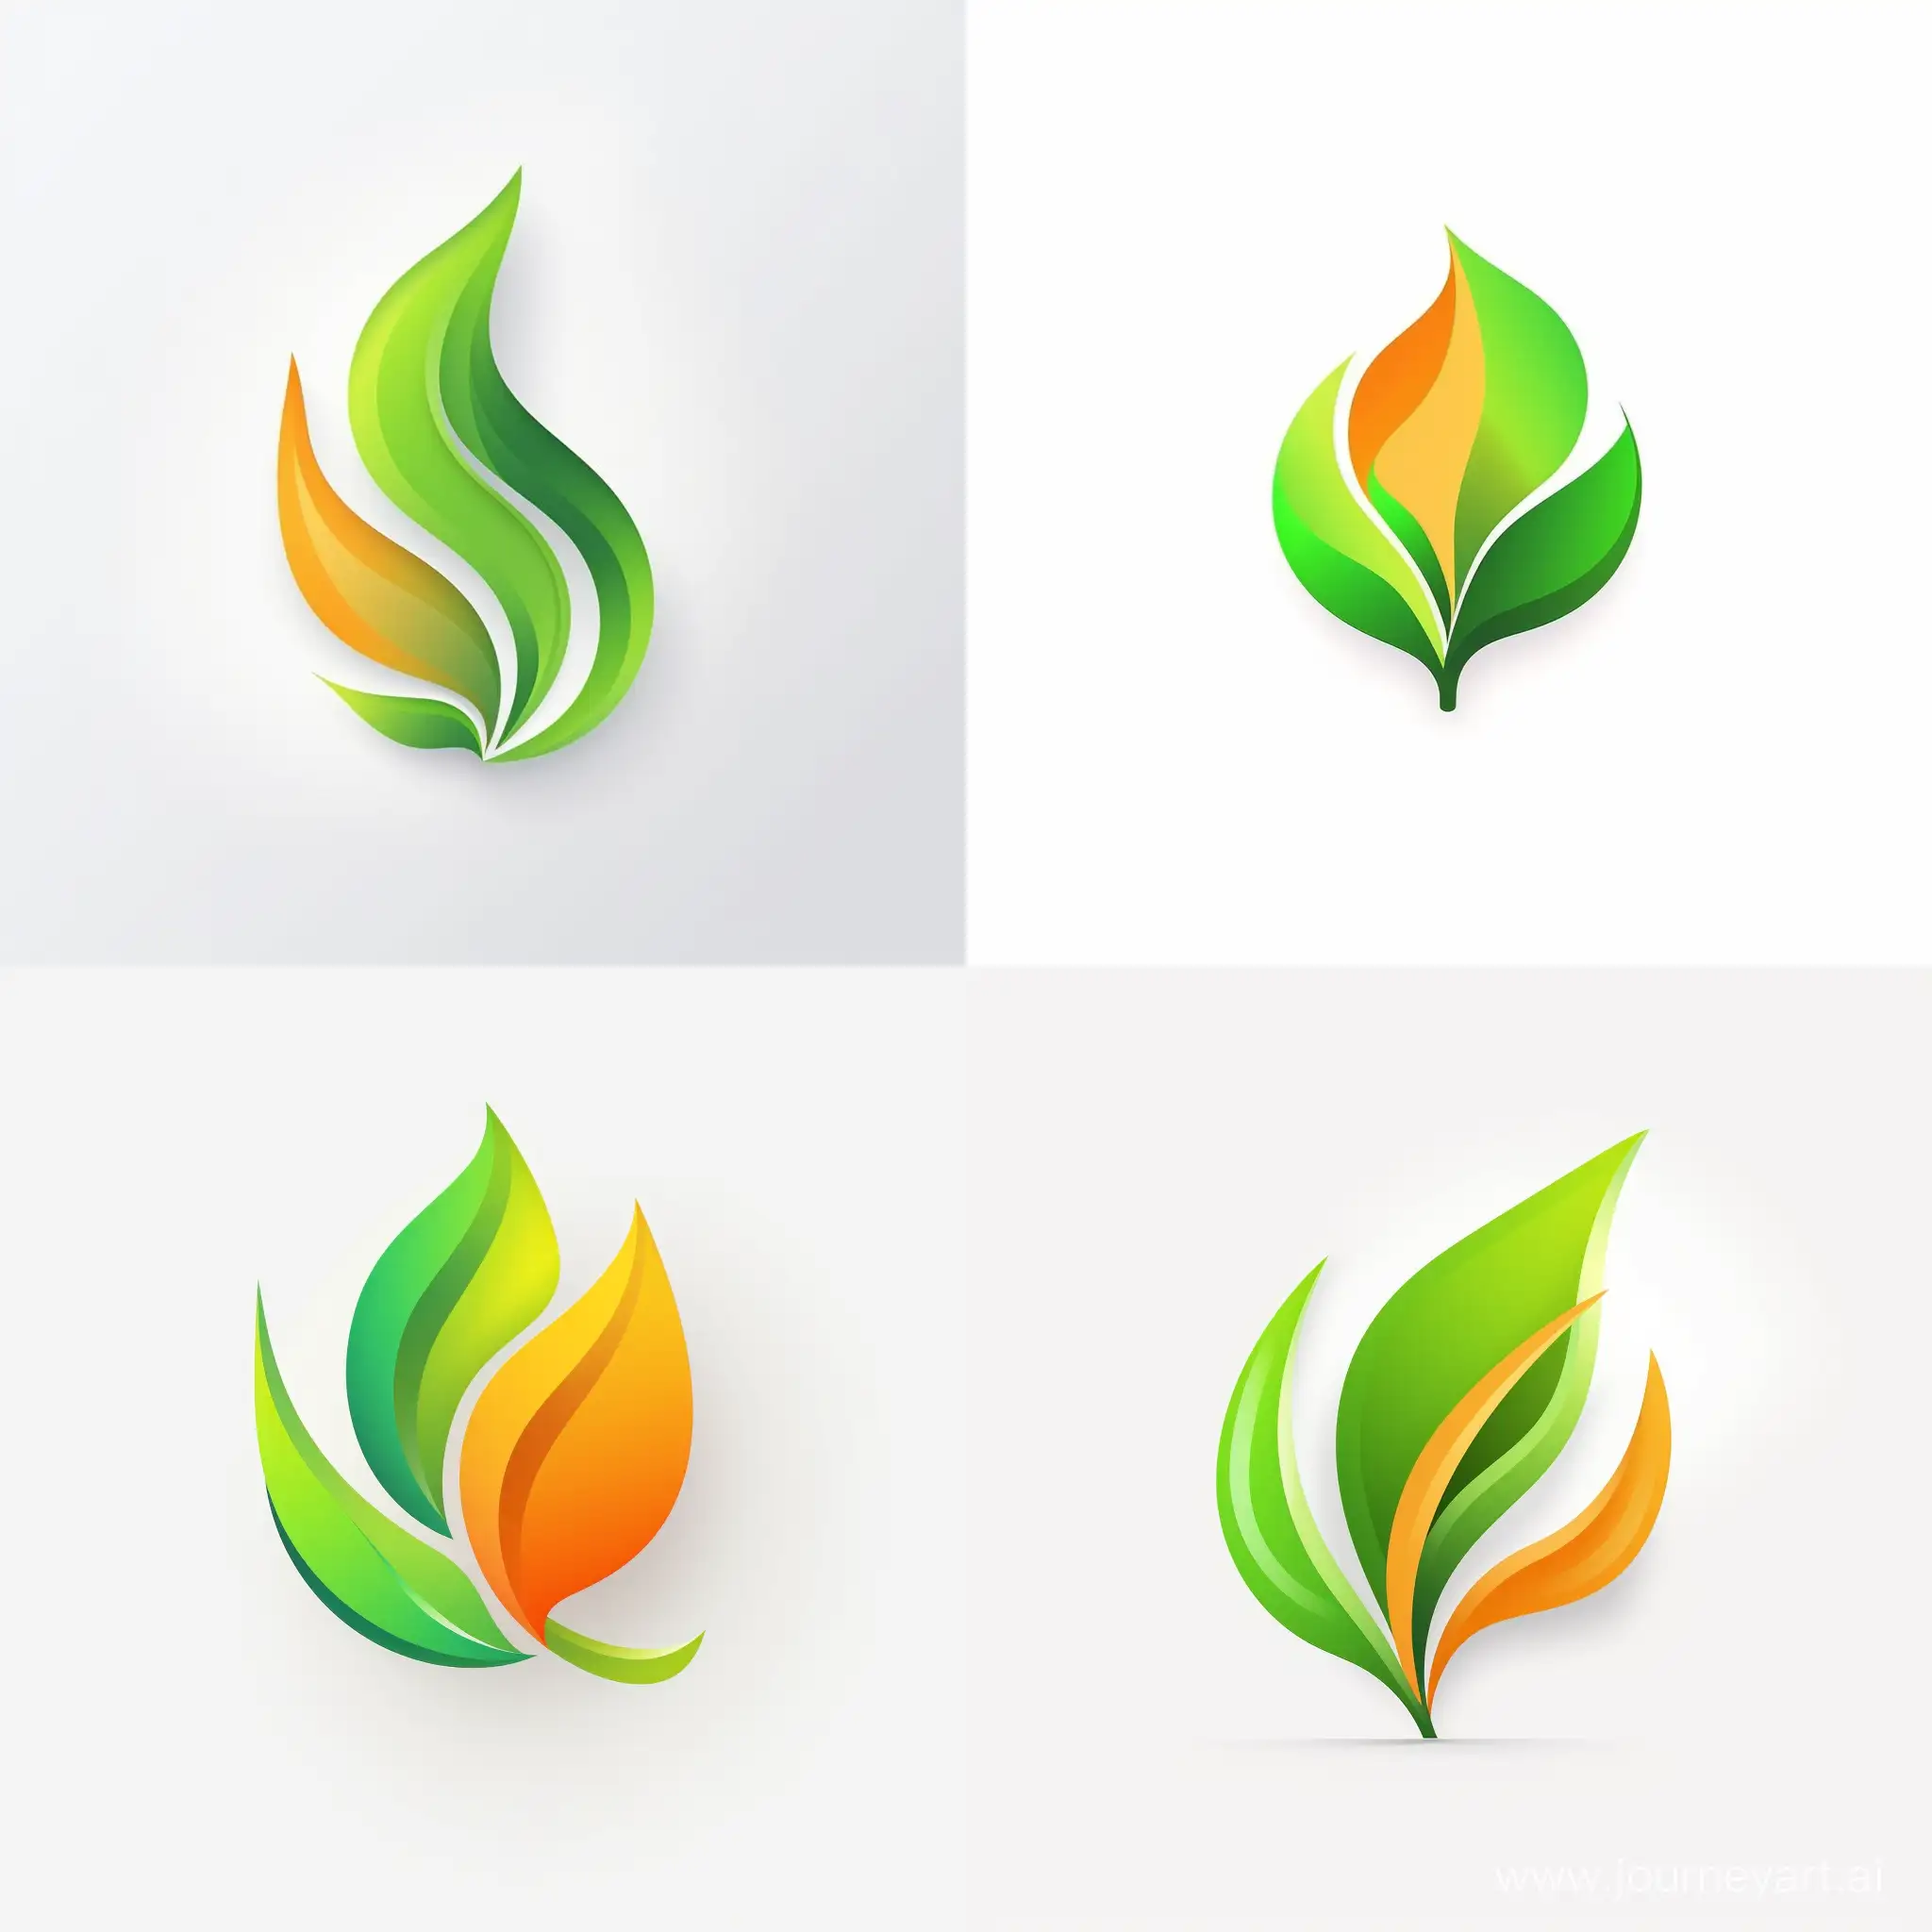 Create a flat vector, illustrative-style abstract concept logo design for a battery-saving app named 'Enersave'. Combine the shapes of a leaf and a directional arrow to represent the app's dedication to saving energy. Use soothing green and vibrant orange colors to create a balance between nature and innovation against a white background. Do not show any realistic photo detail shading.